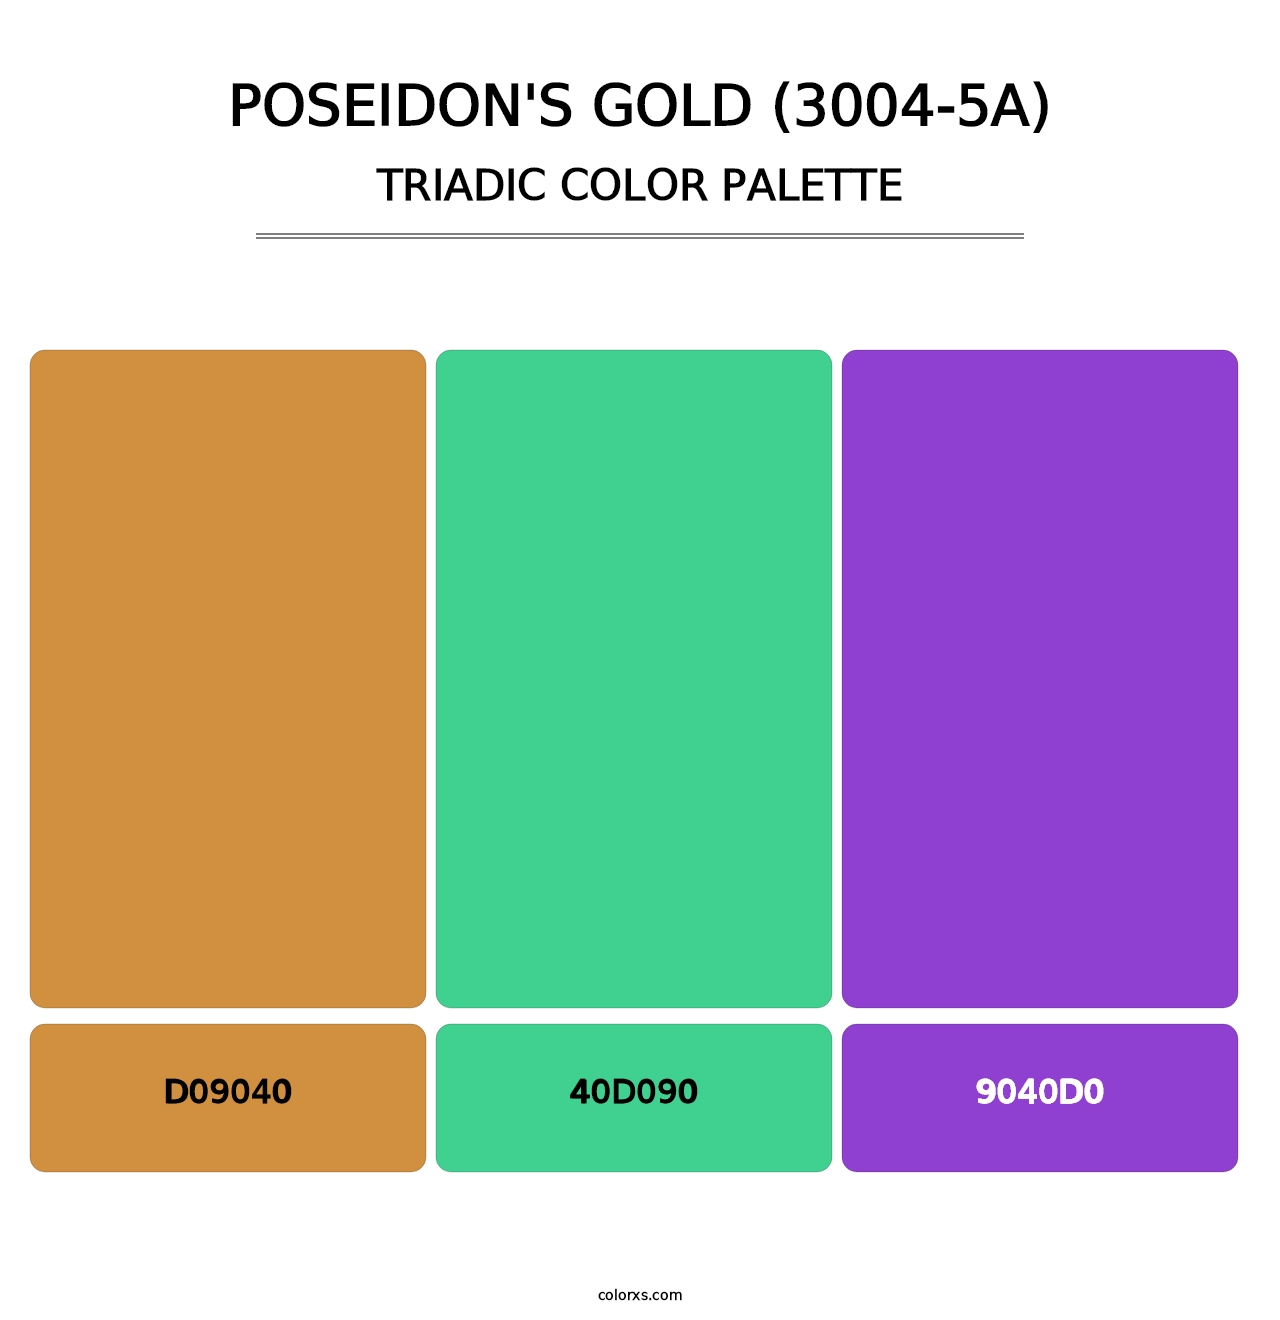 Poseidon's Gold (3004-5A) - Triadic Color Palette